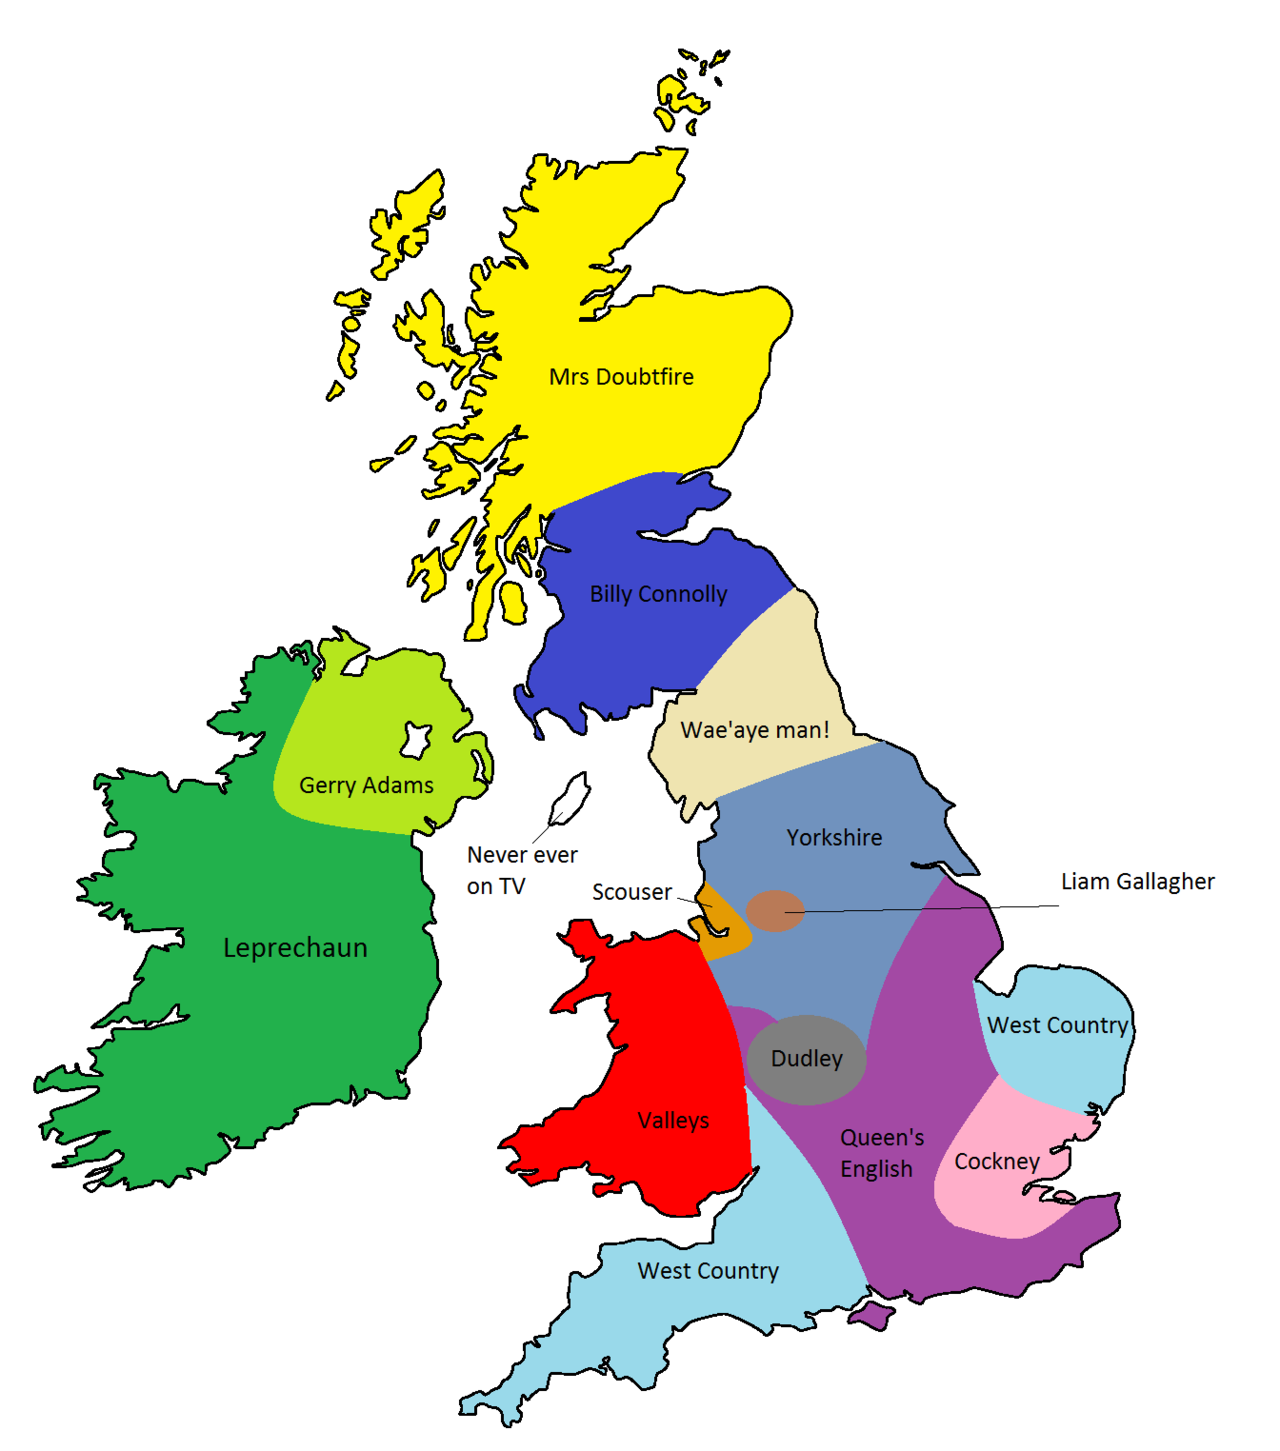 OUTTAKES: MAP 13: ACCENTS, UK & IRELAND - ClipArt Best - ClipArt Best